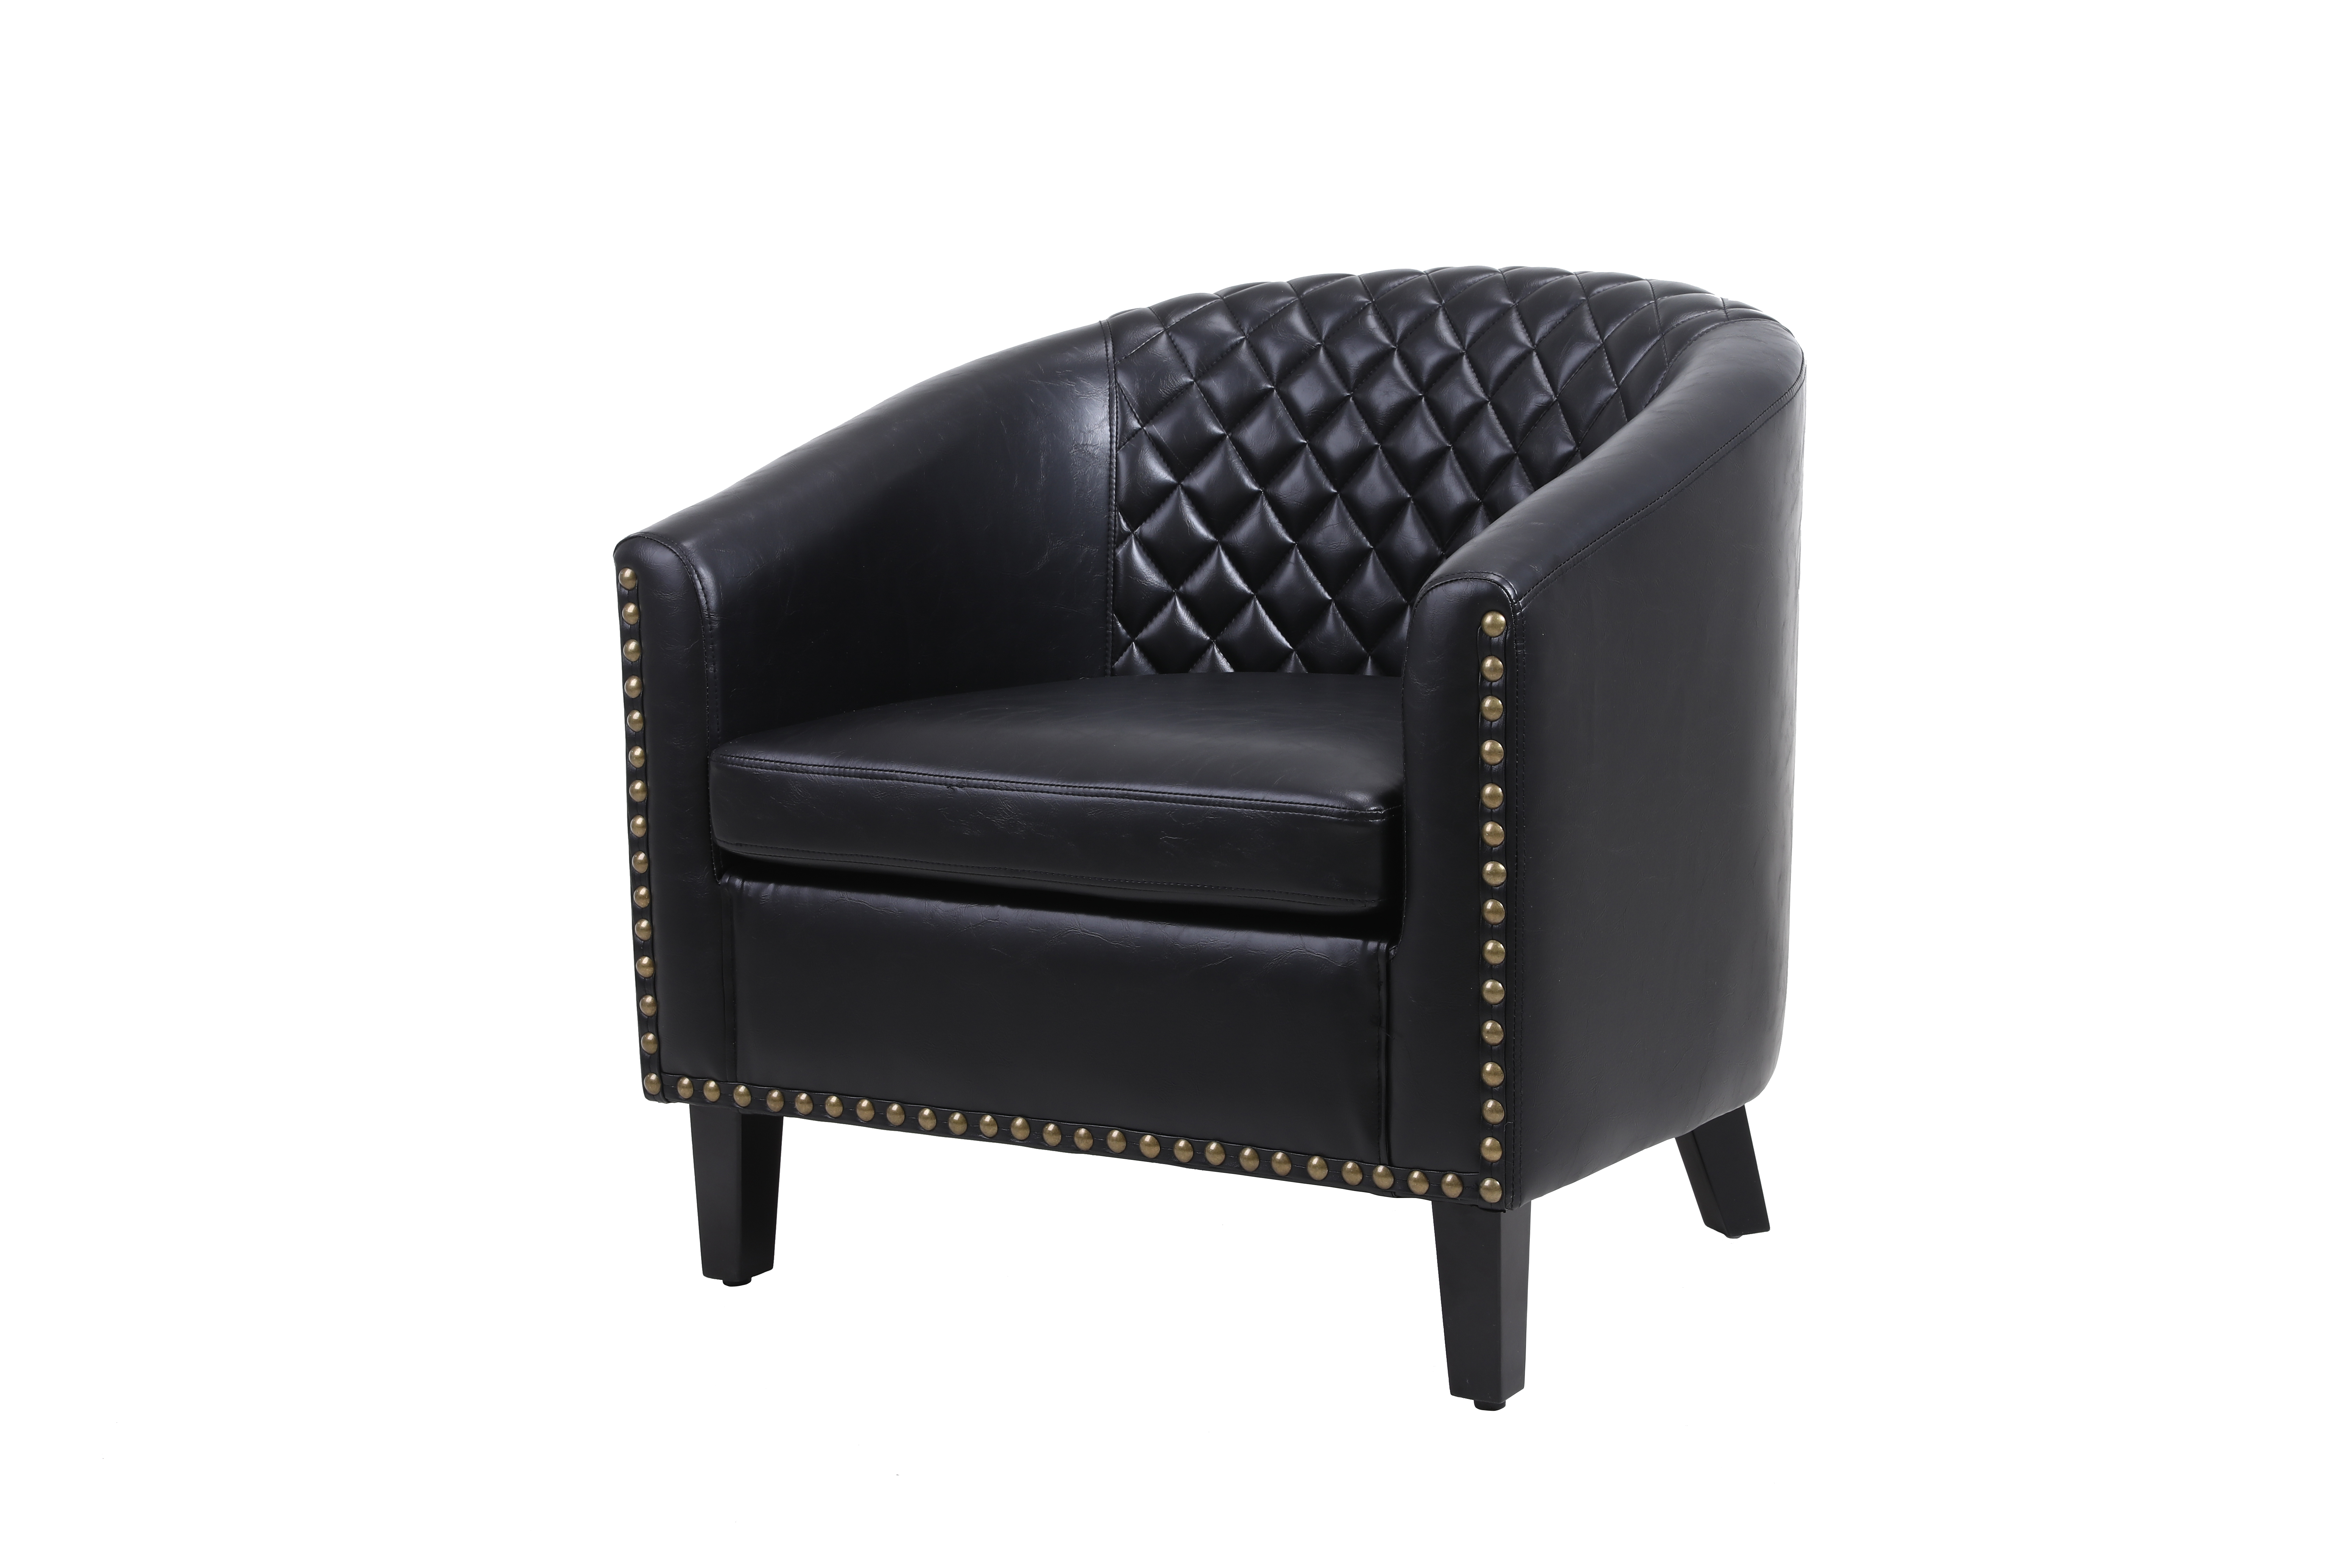 Modern Barrel Chair Tub Chair Faux Leather Club Chair with Arms and Nailheads, Upholstered Barrel Accent Chair for Living Room Bedroom - Black - image 3 of 8